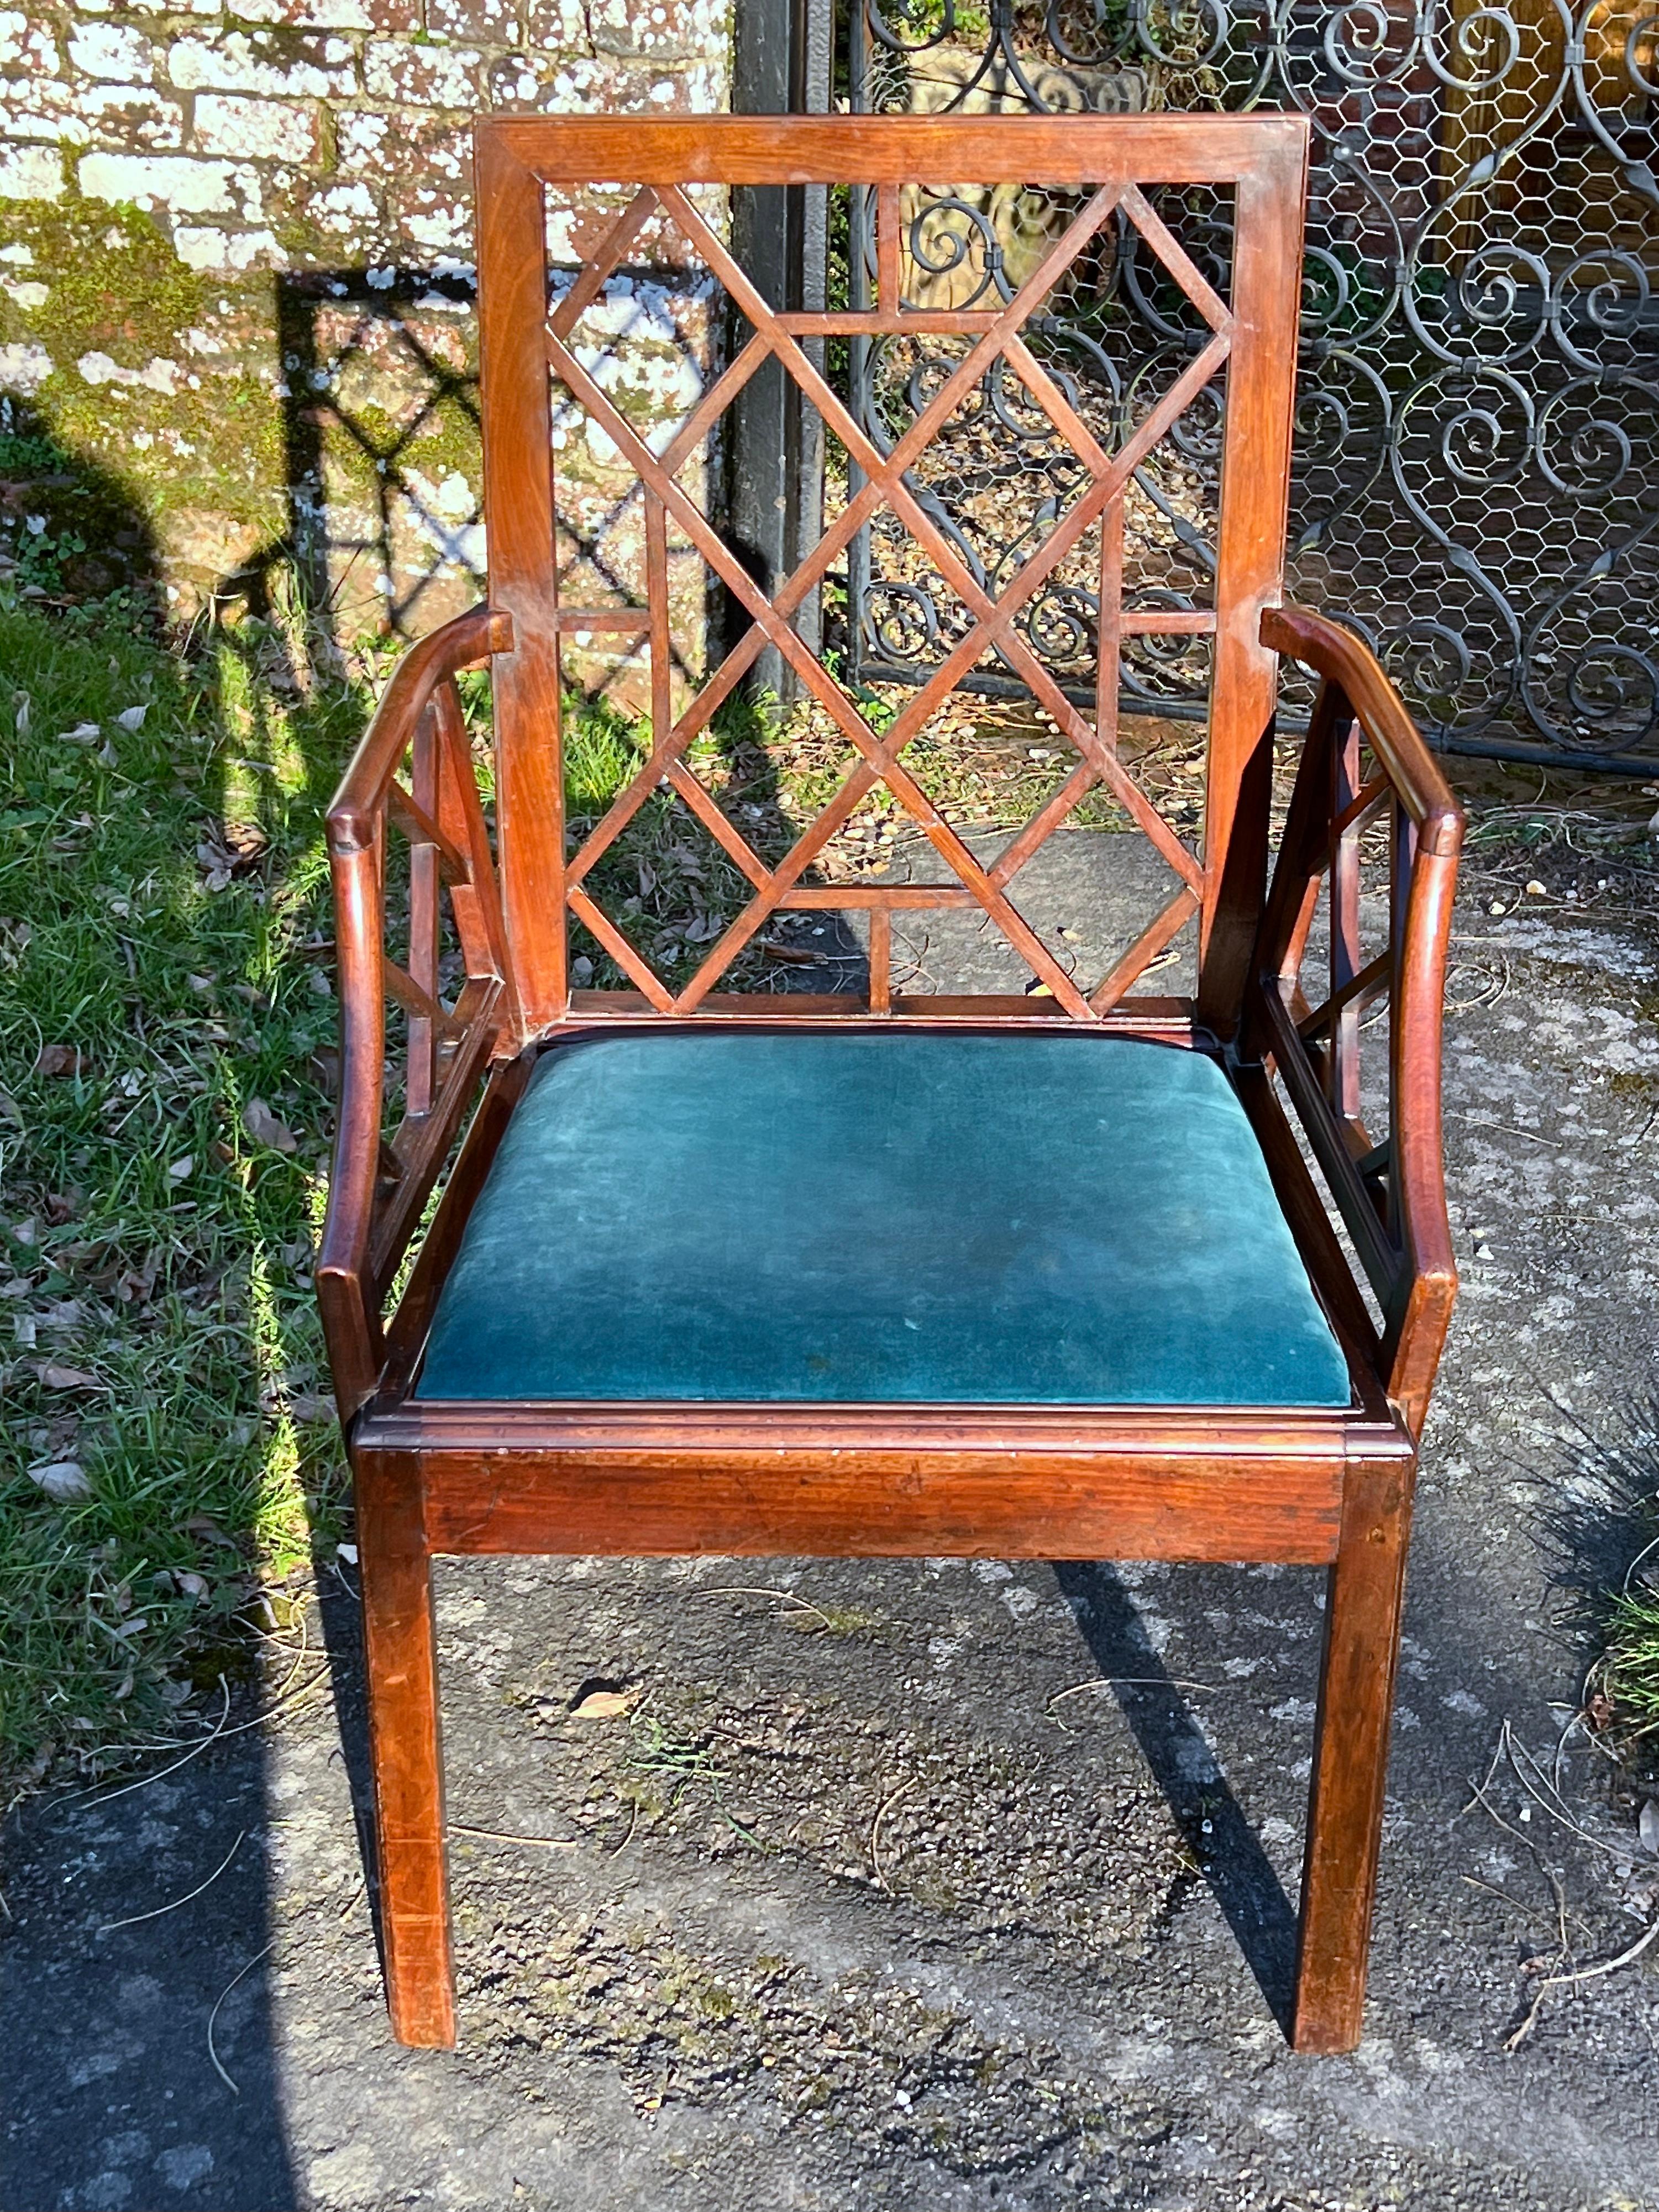 A rare 18th-century mahogany Cockpen open armchair of very good quality. George III period, ca 1760.

This antique armchair is in mahogany with a chinoiserie open-fretwork (or Chinese latticework) frame, including in the outset arms.

Raised on